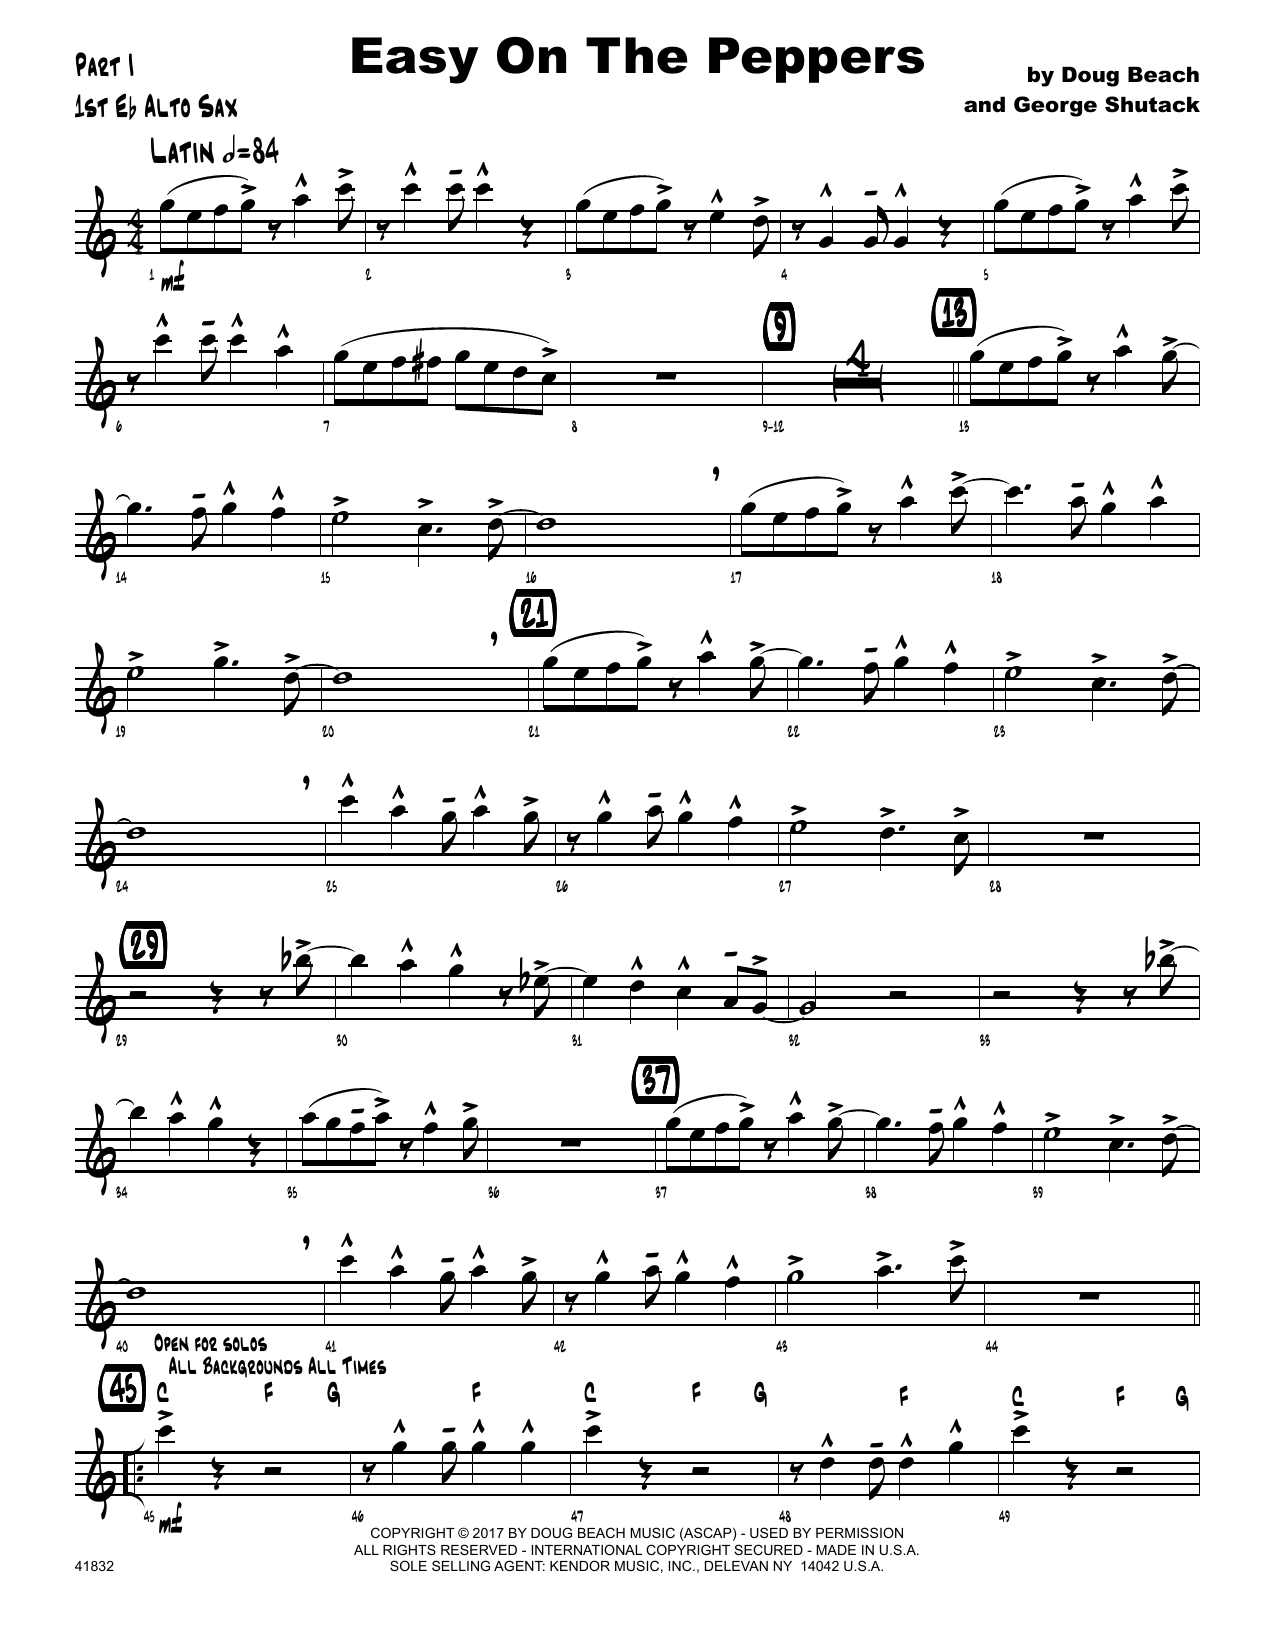 Download Doug Beach & George Shutack Easy On The Peppers - 1st Eb Alto Saxop Sheet Music